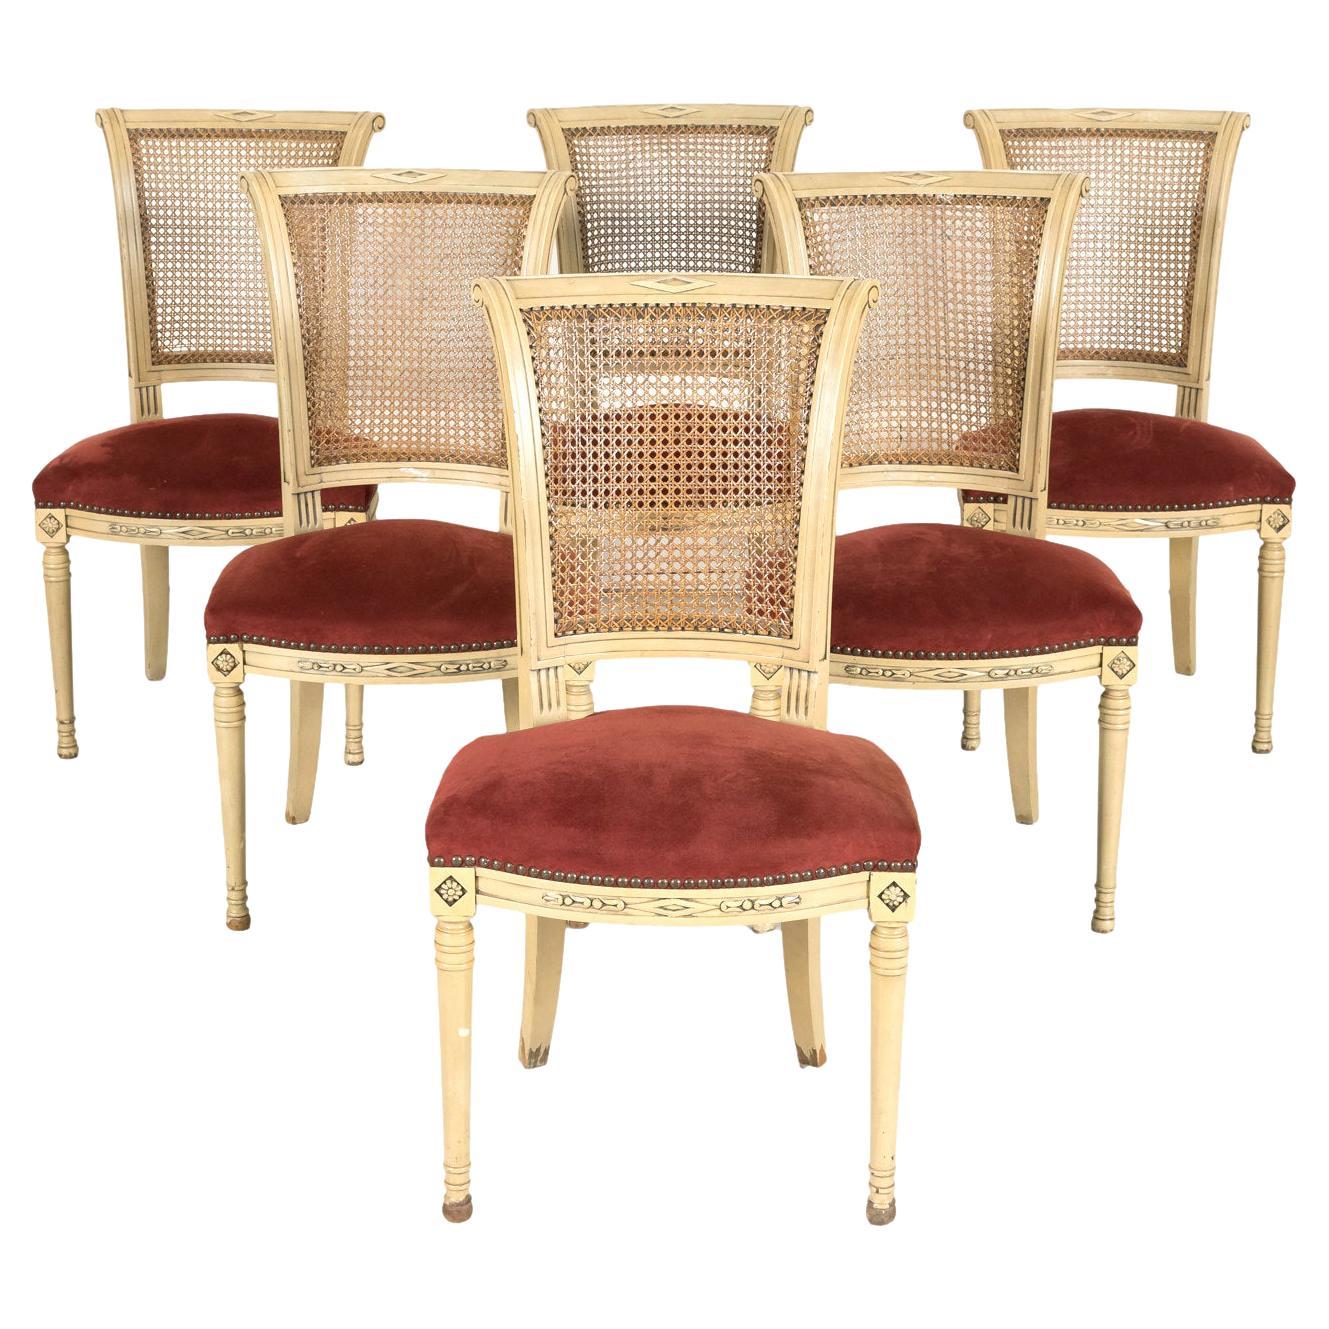 Set of 6 Antique French Directoire Style Painted Cane Back Dining Side Chairs